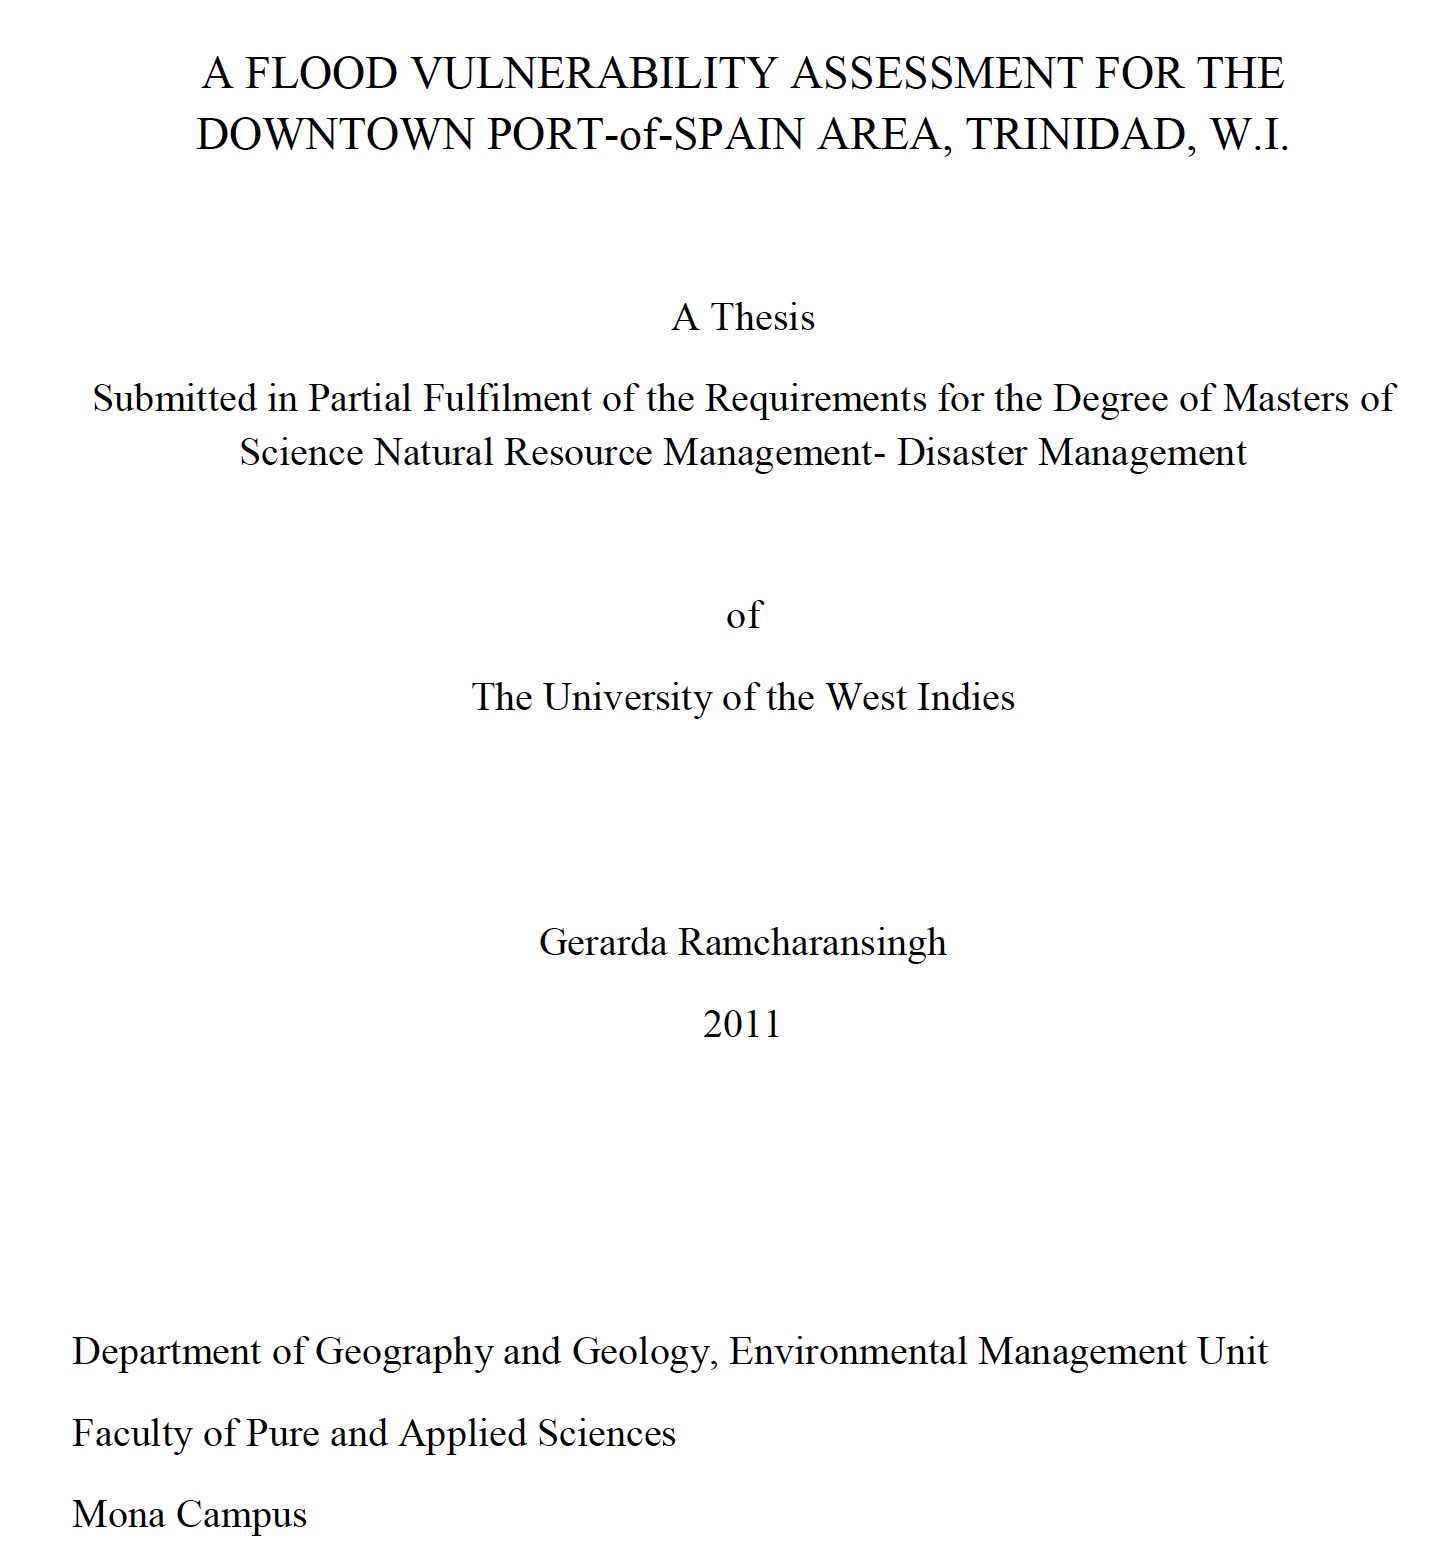 A Flood Vulnerability Assessment for the Downtown Port-of-Spain Area, Trinidad & Tobago